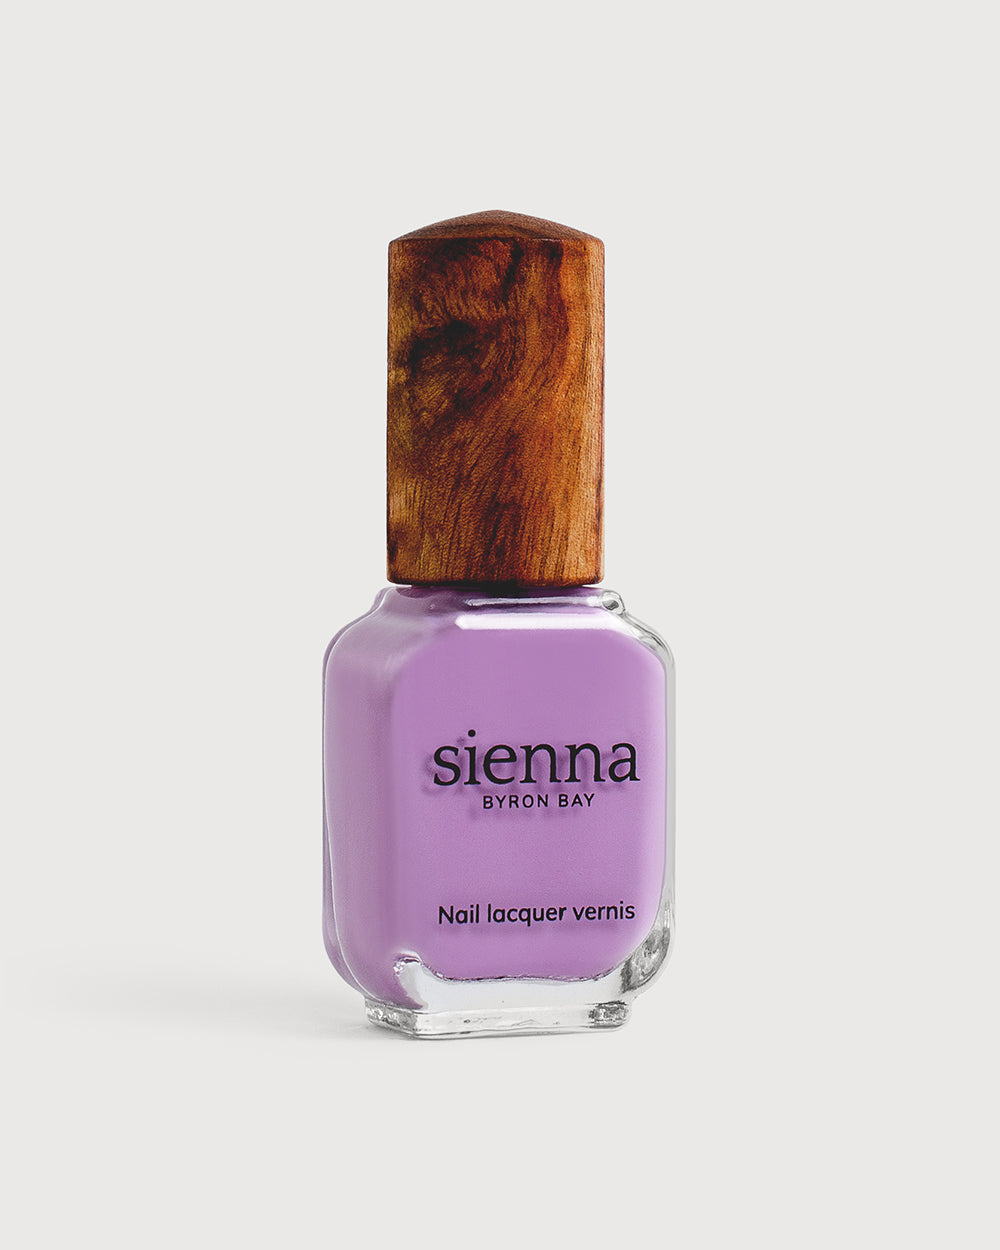 Mid-tone lilac nail polish glass bottle with timber cap